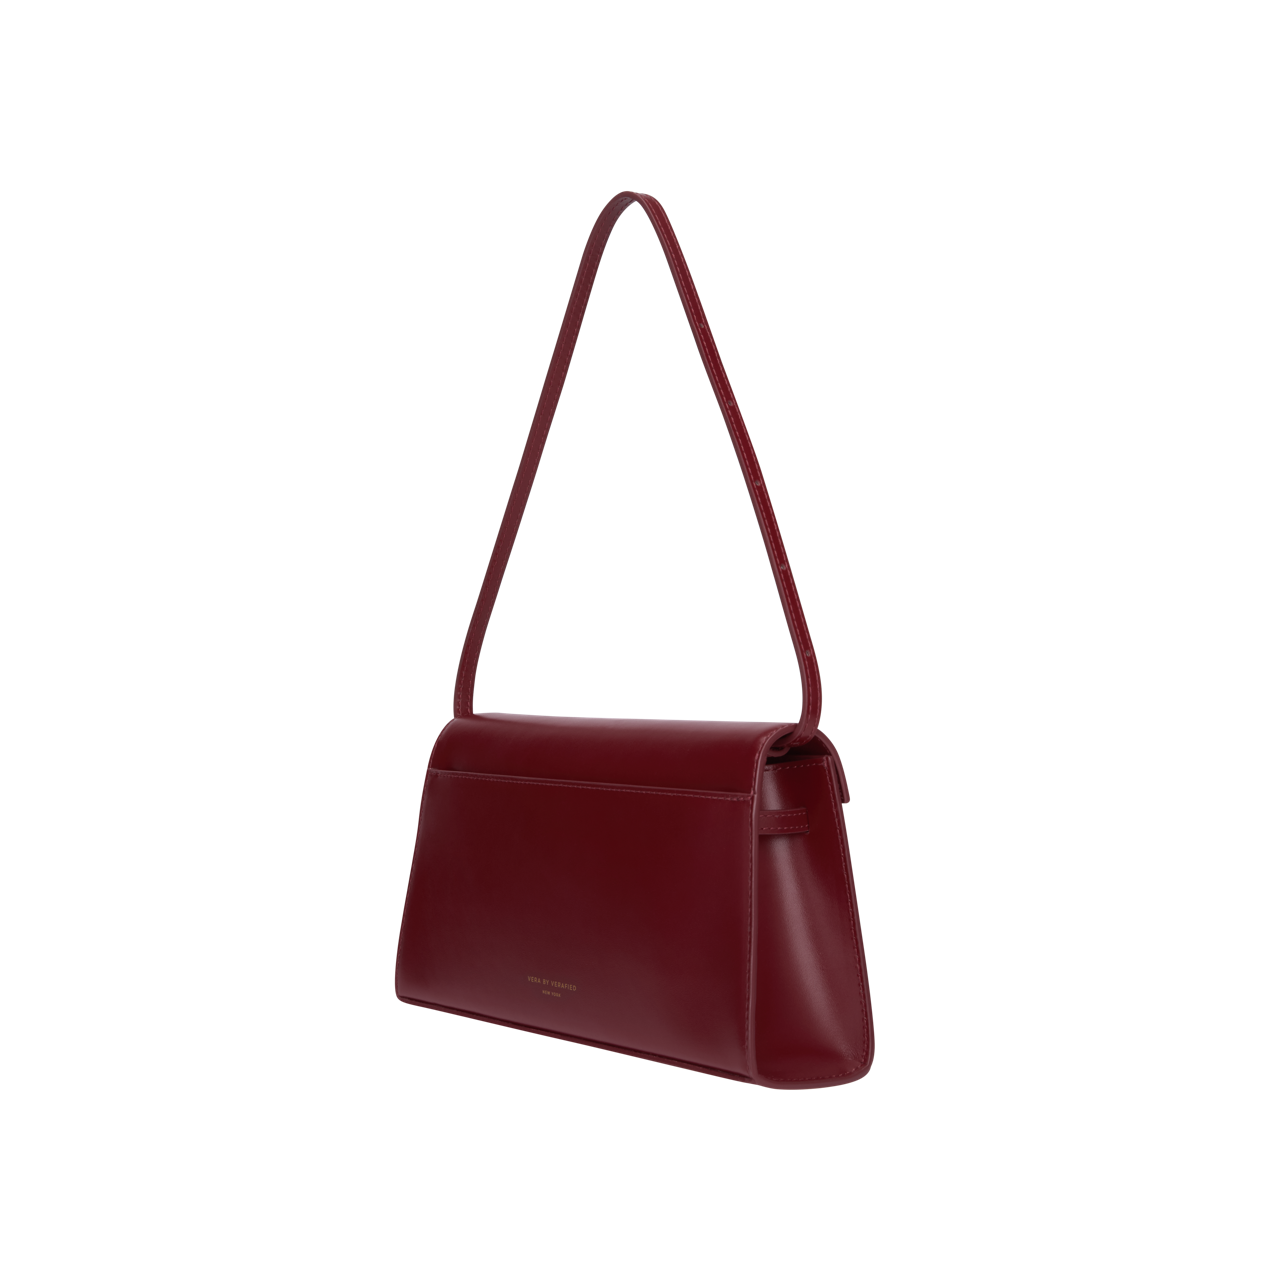 Dark Cherry Shoulder Bag(Pre-Order Only.Will Ship Late May)